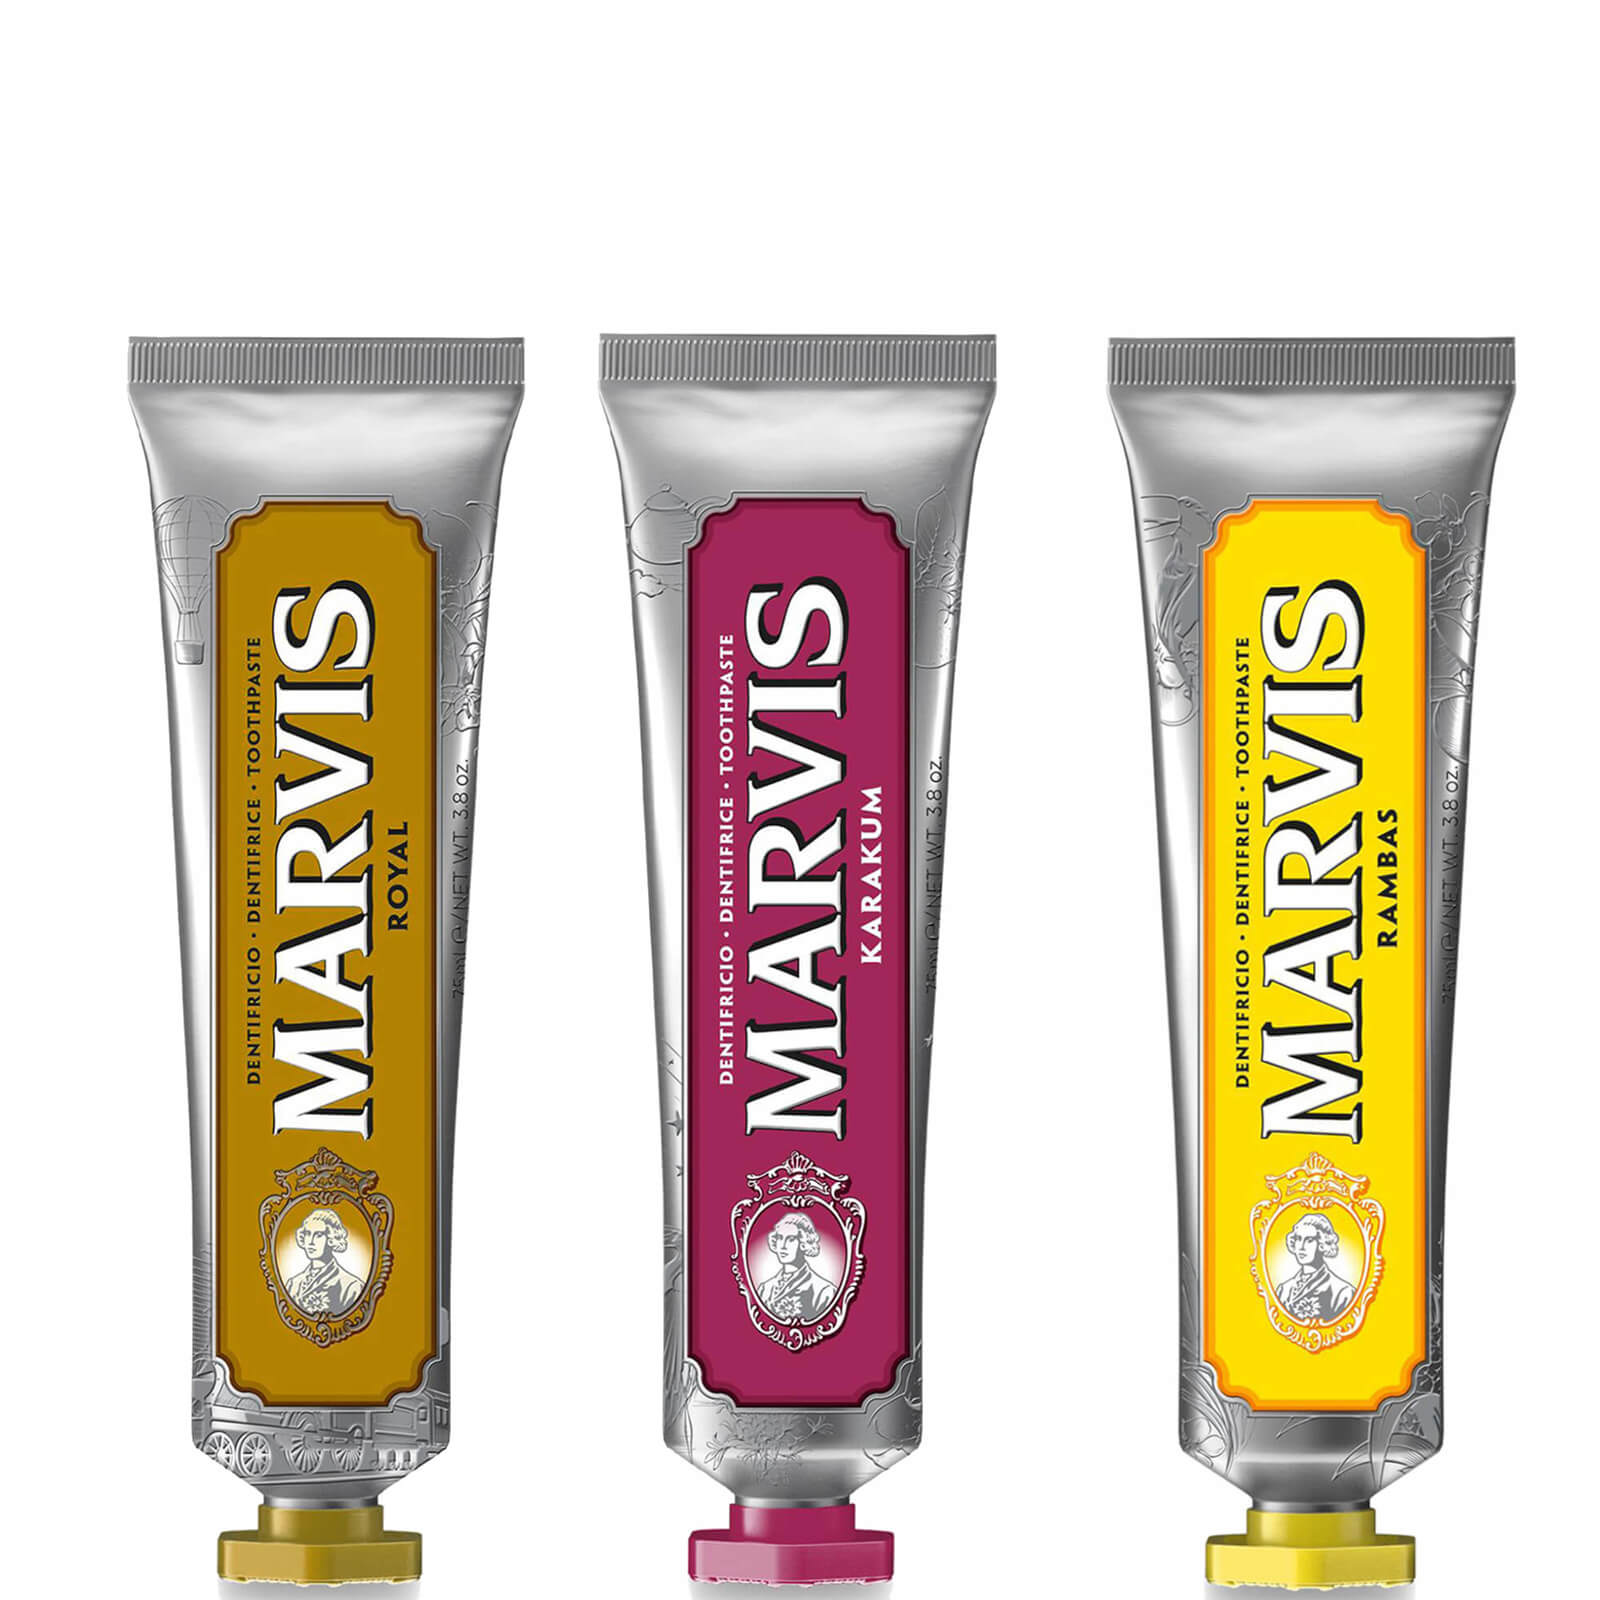 Marvis Wonders of the World Toothpaste Collection lookfantastic.com imagine